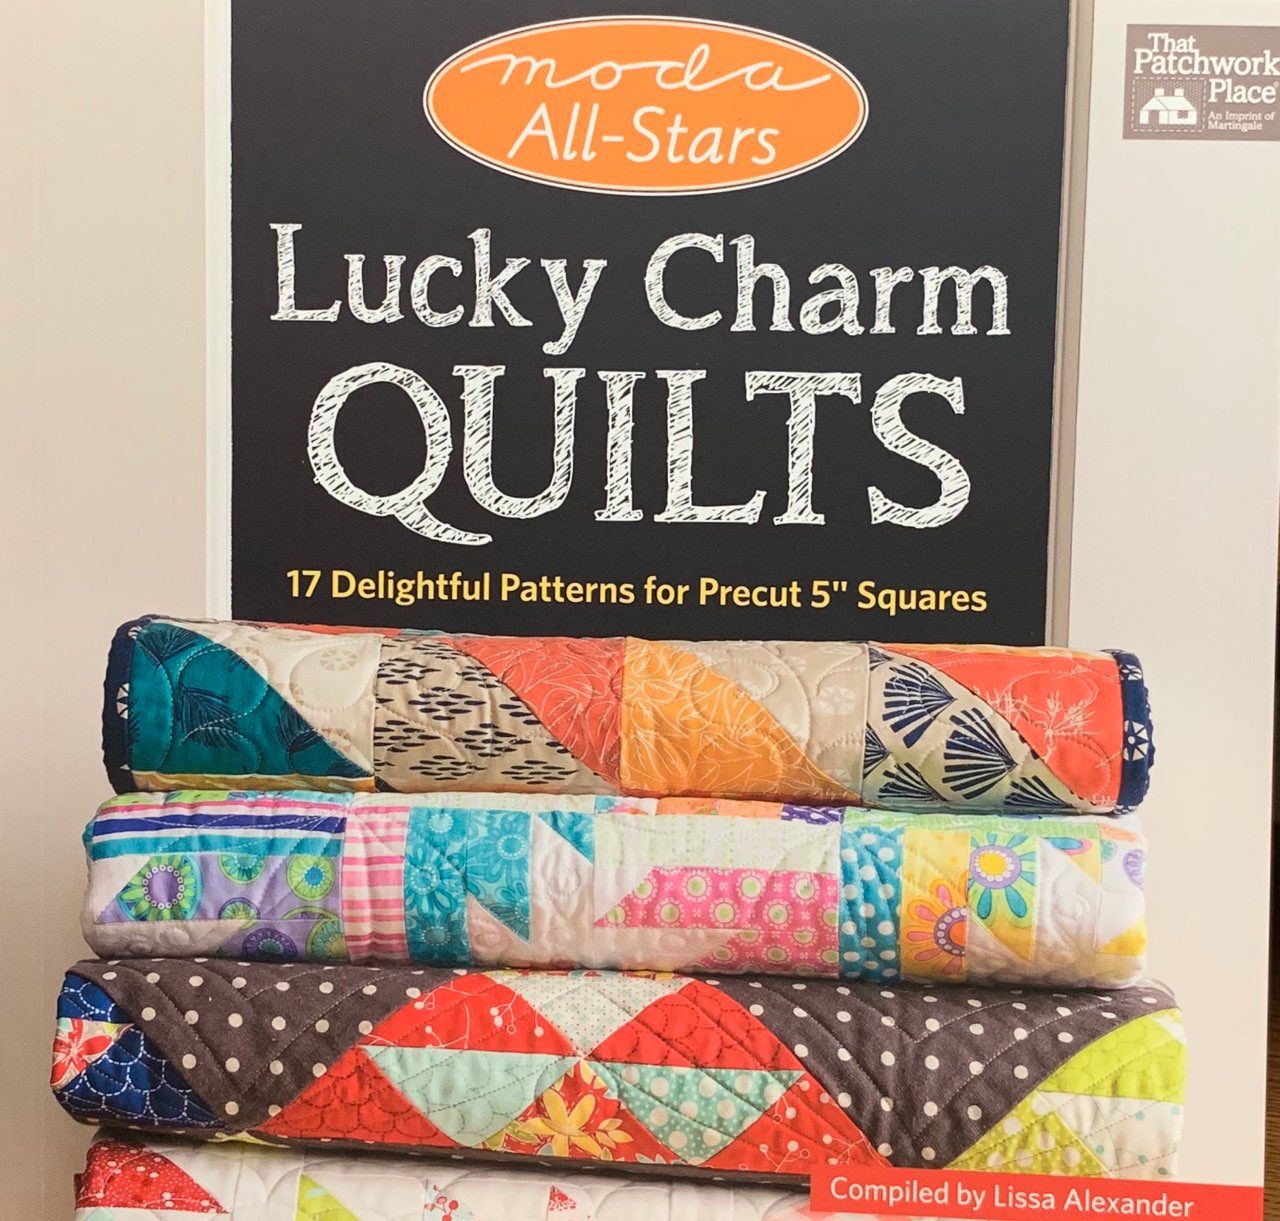 Moda - All-Stars Lucky Charm Quilts